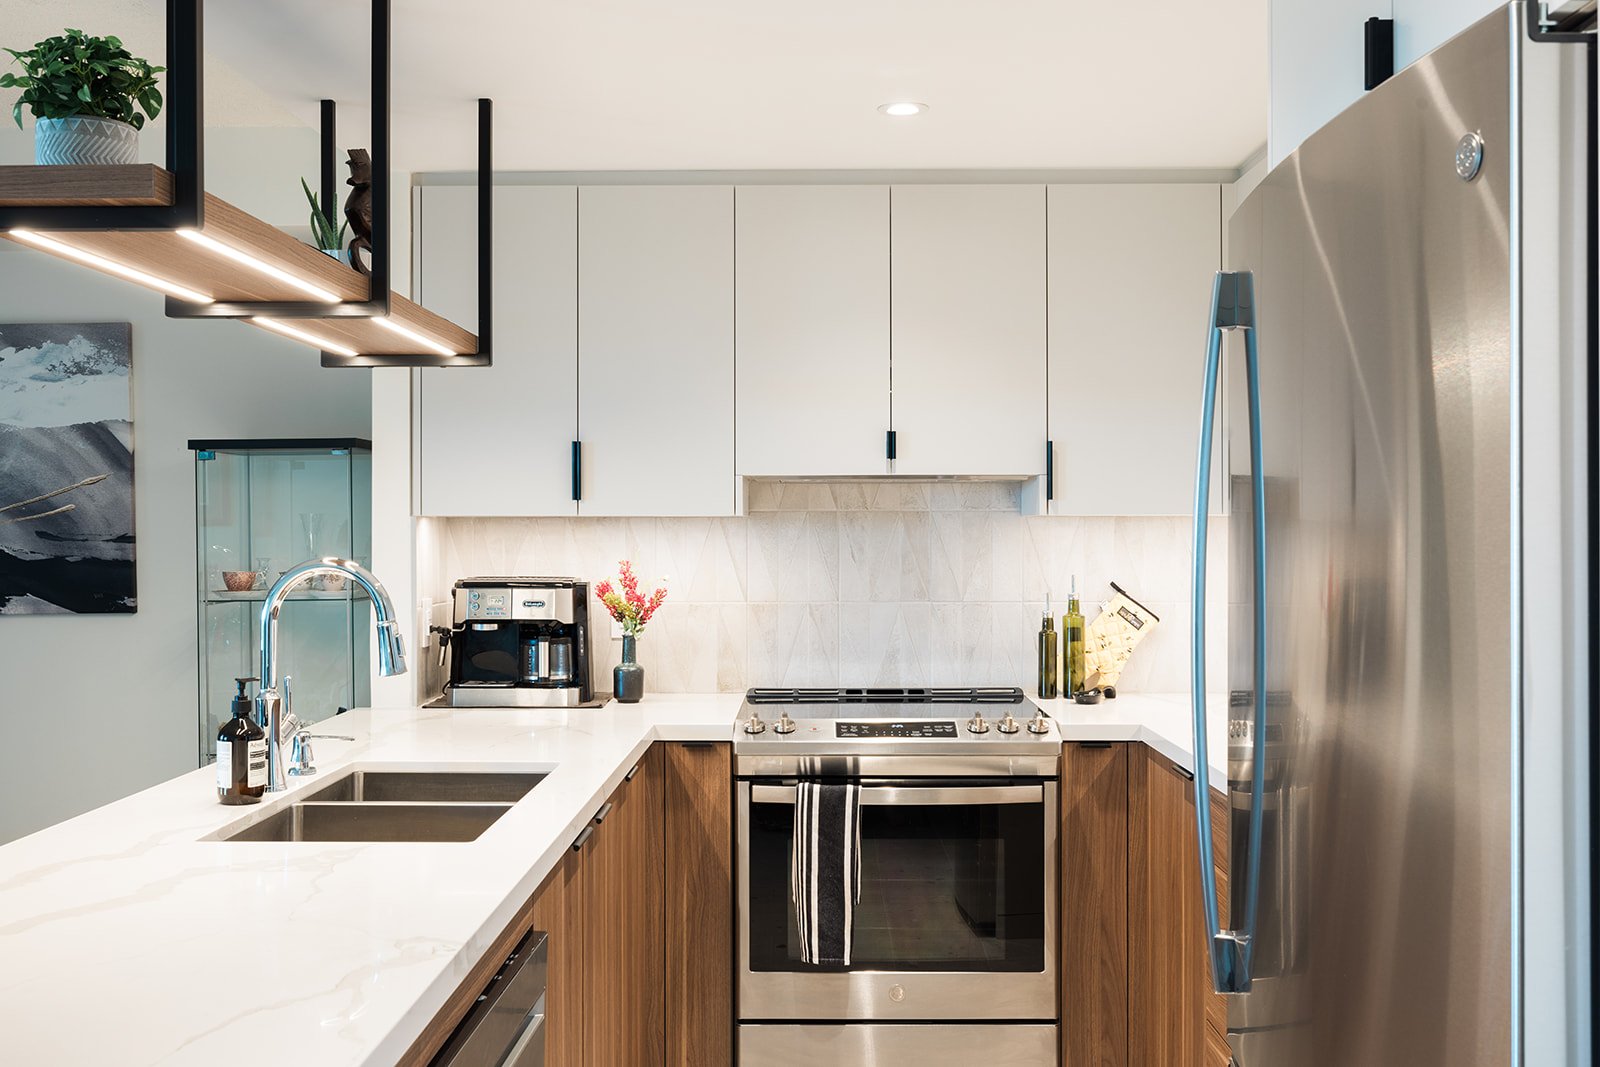 GTA condo kitchen renovation with flat panel two tone cabinets by Golden Bee Condos